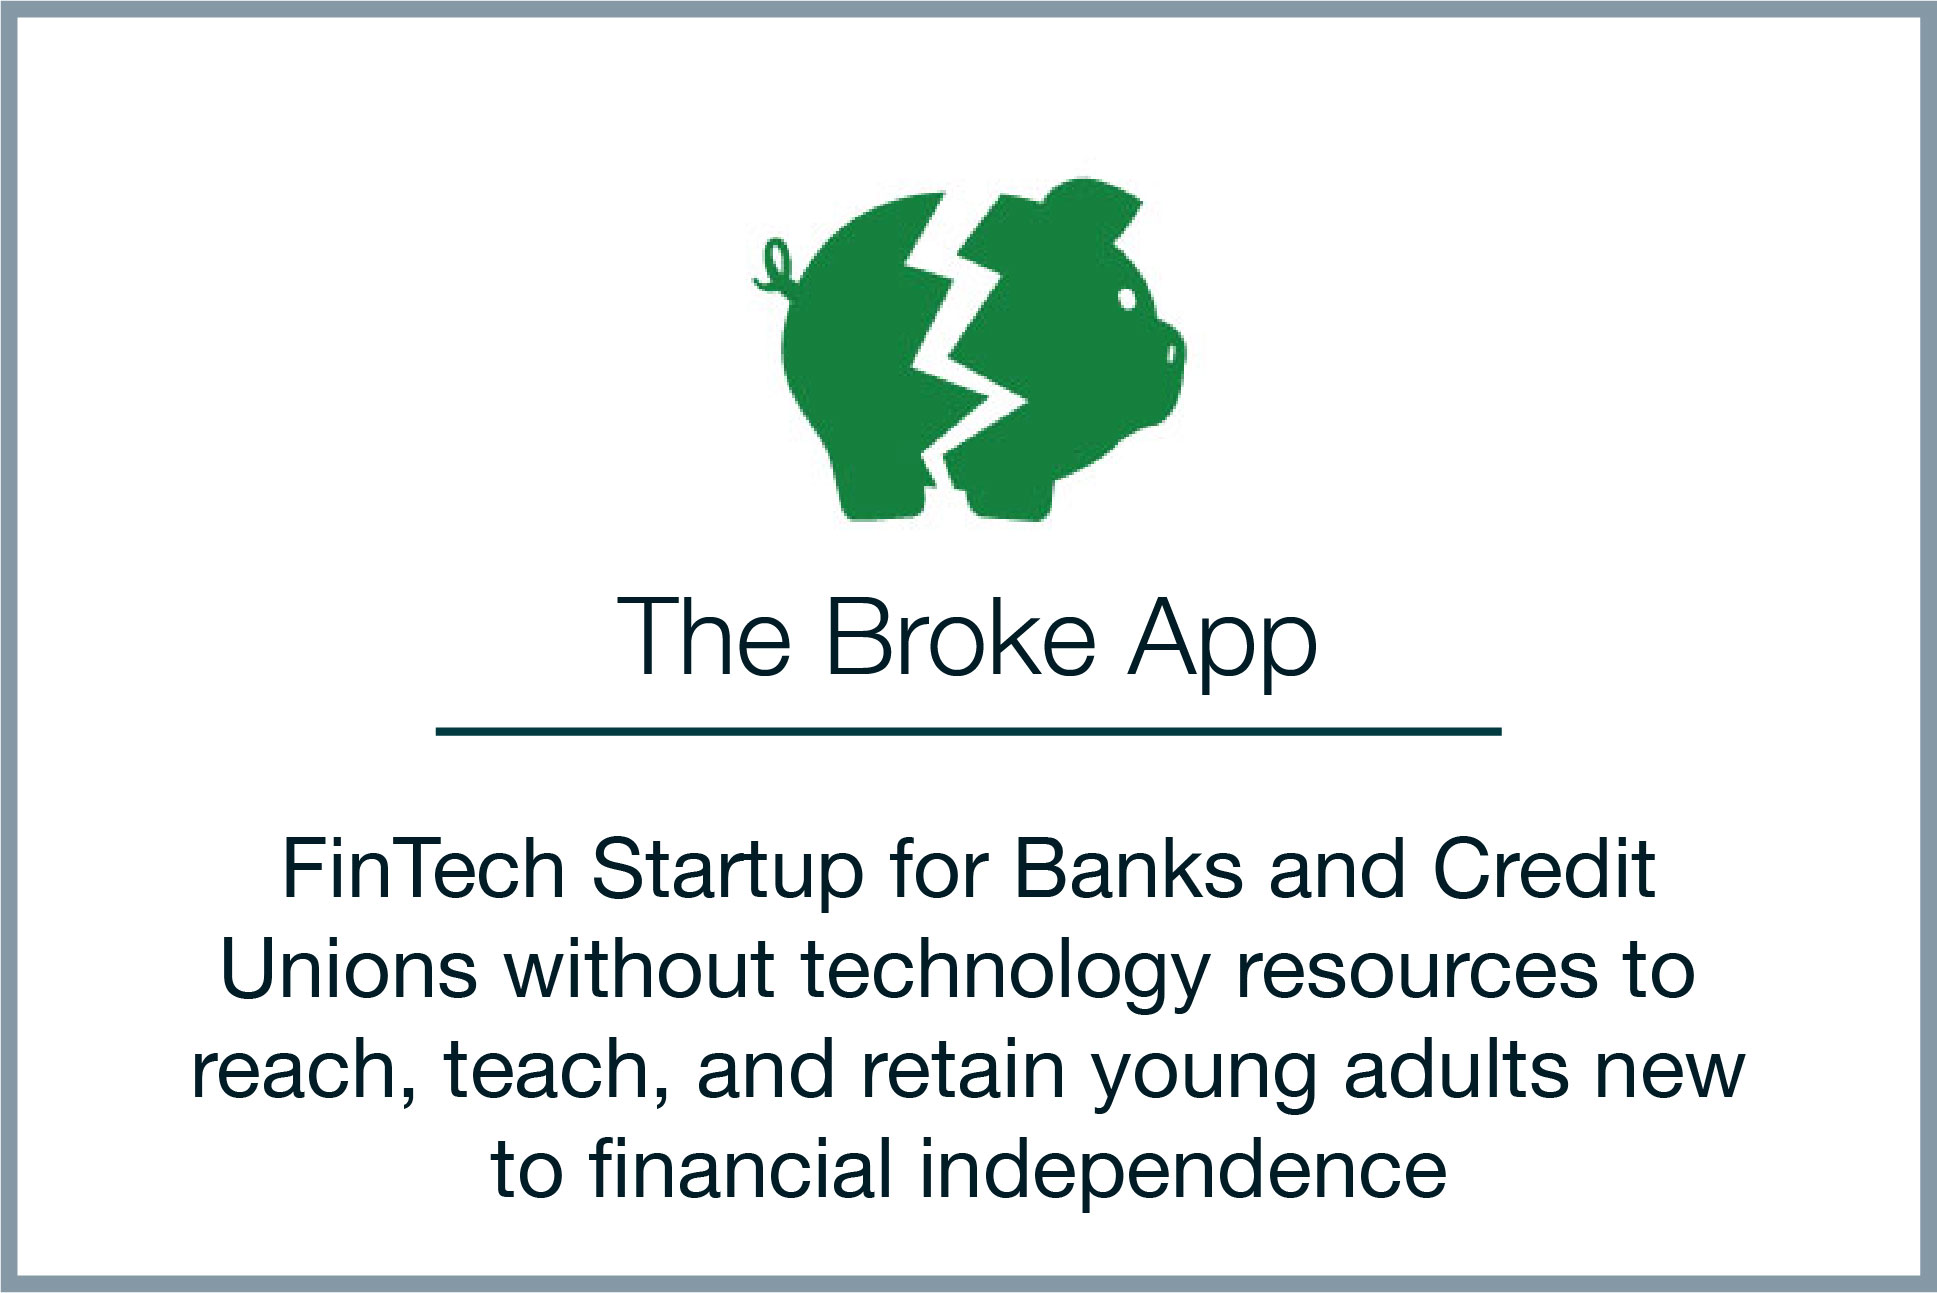 FinTech Startup for Banks and Credit Unions to reach, teach, and retain newly financially independing adults.